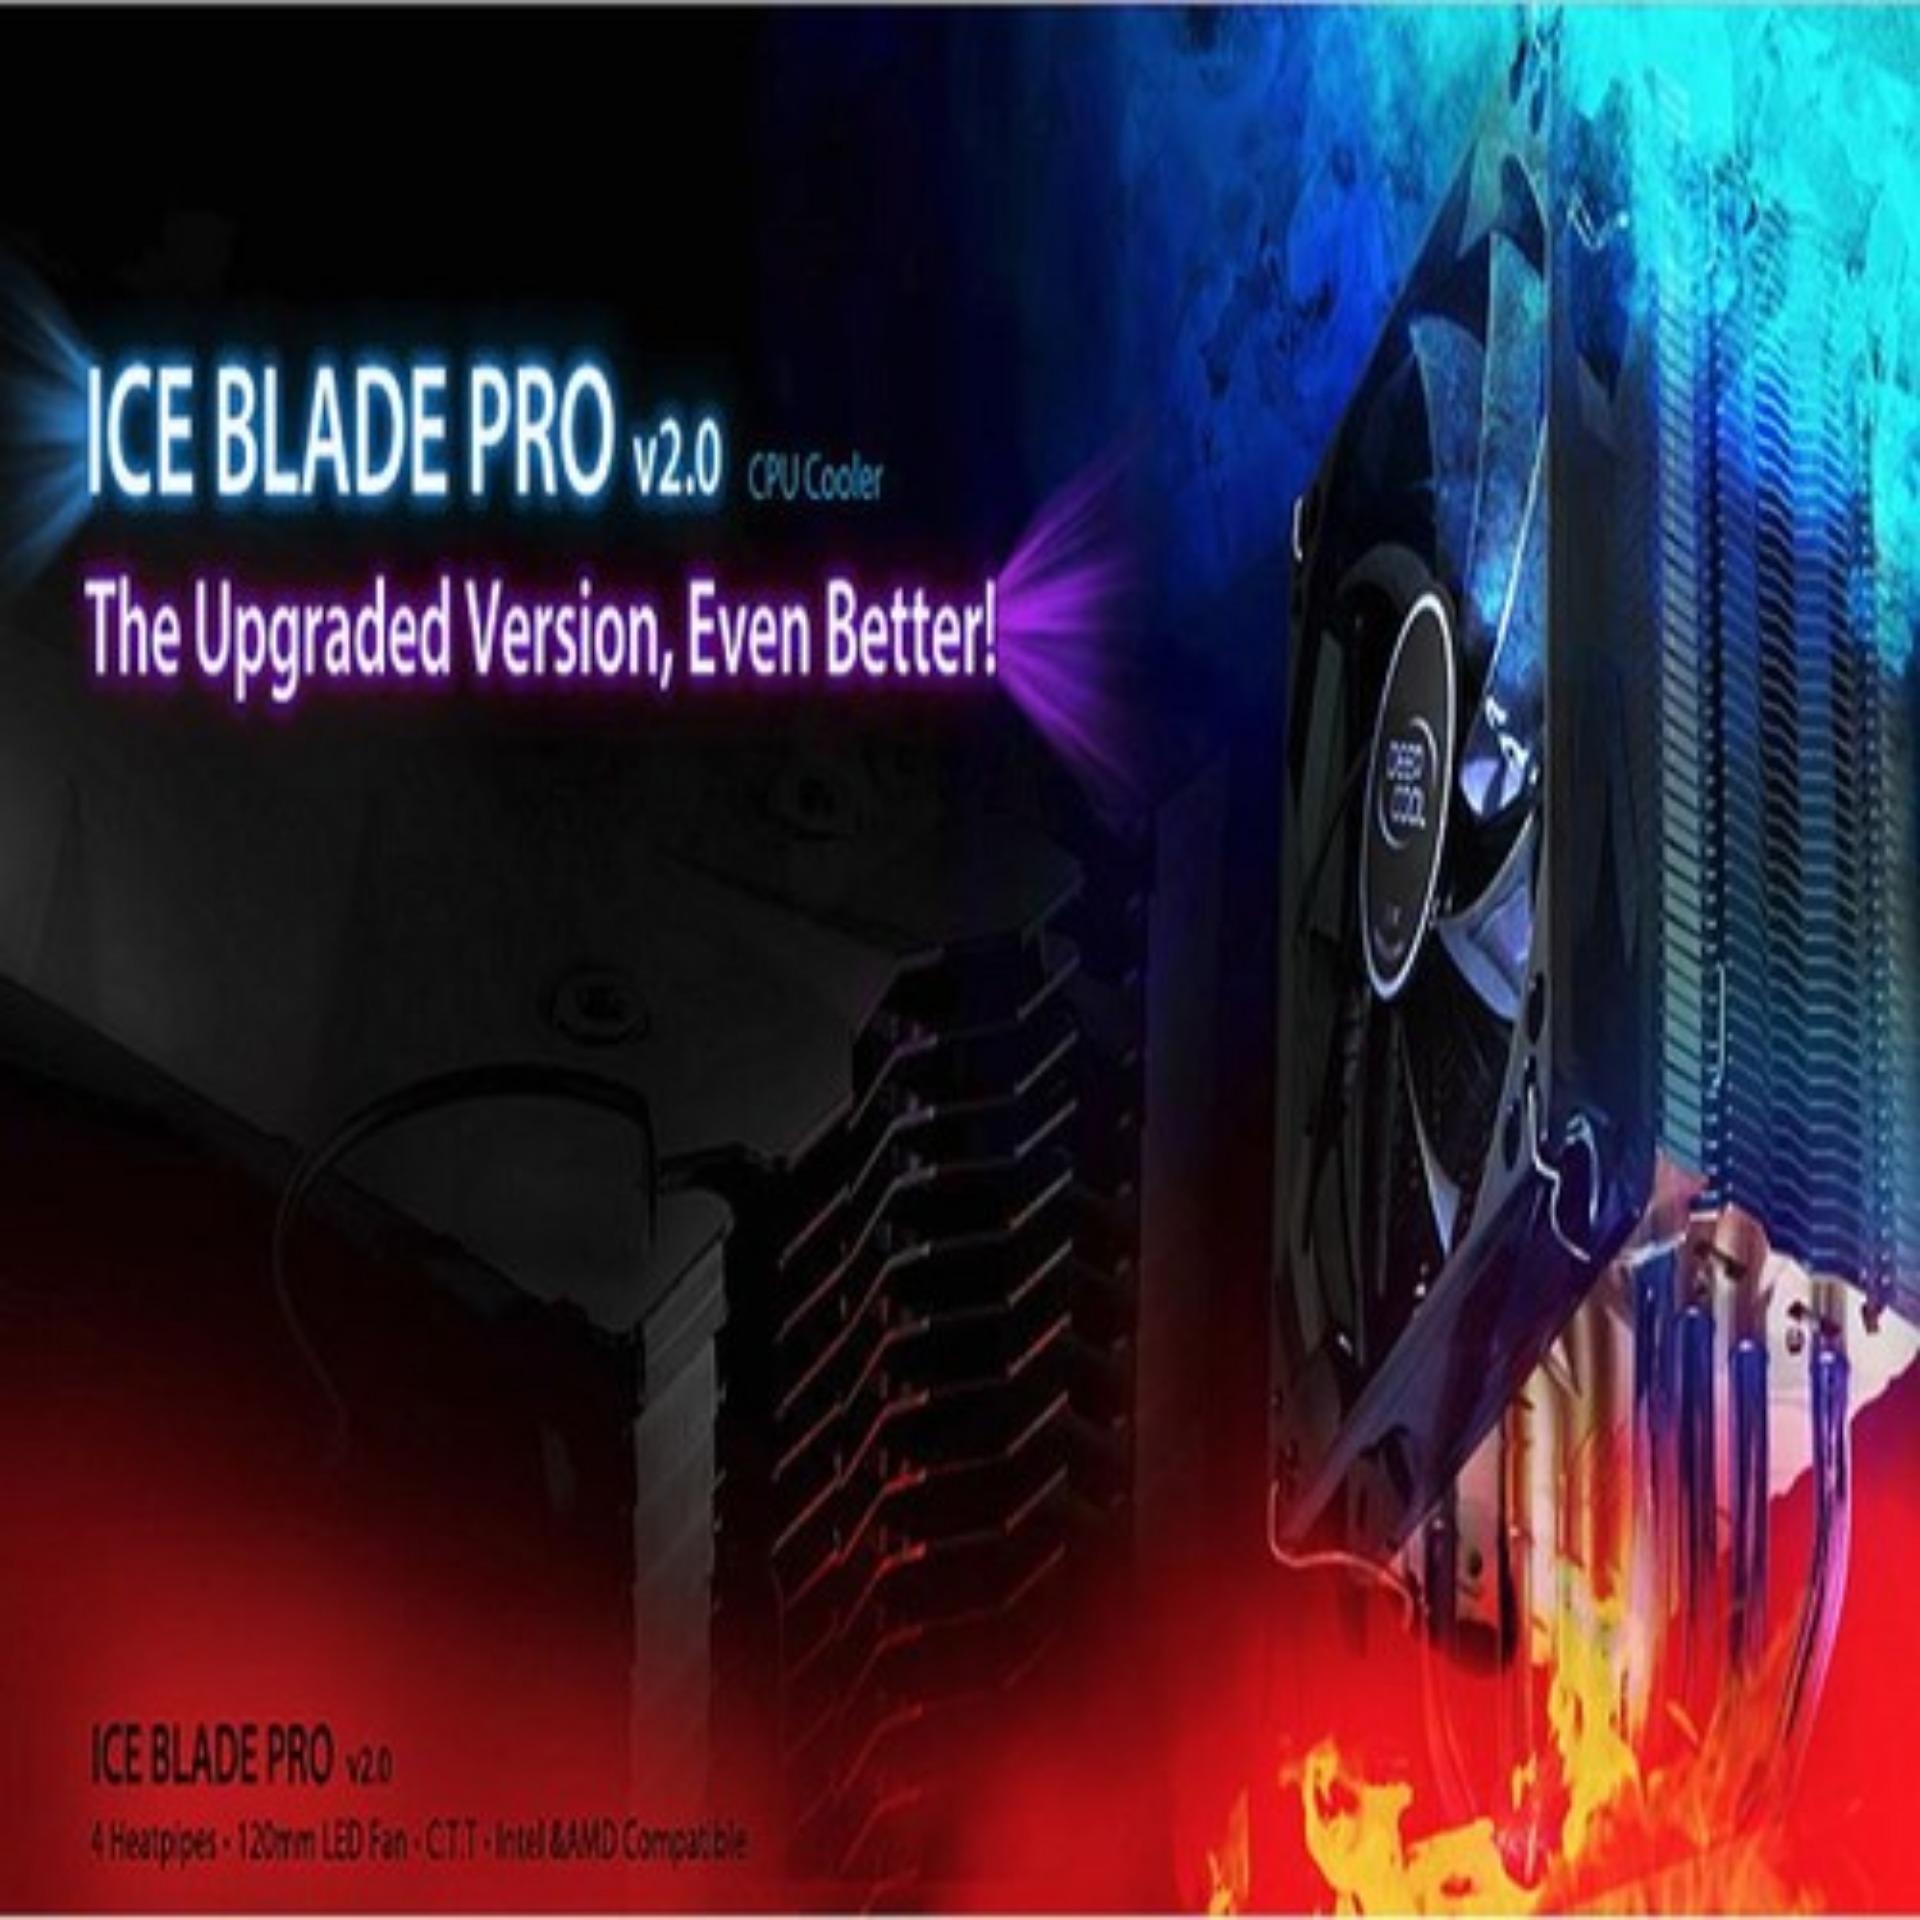 ICE BLADE PRO V2.0 DEEPCOOL CPU Air Coolers